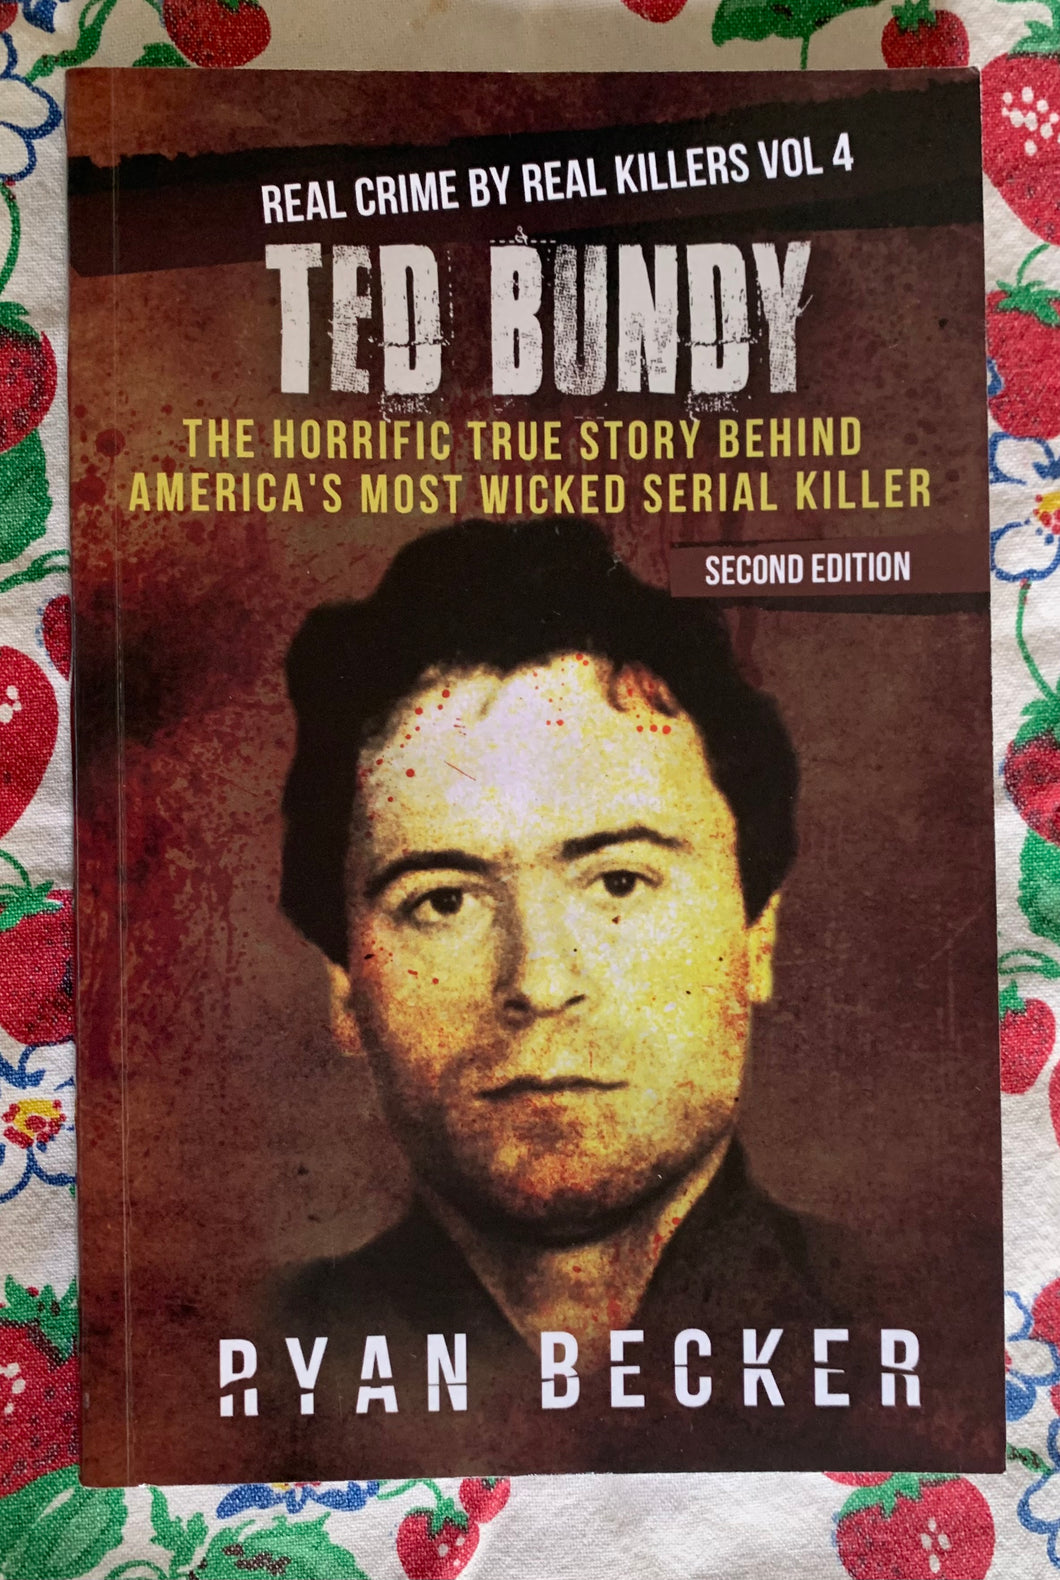 Real Crime By Real Killers Vol 4: Ted Bundy